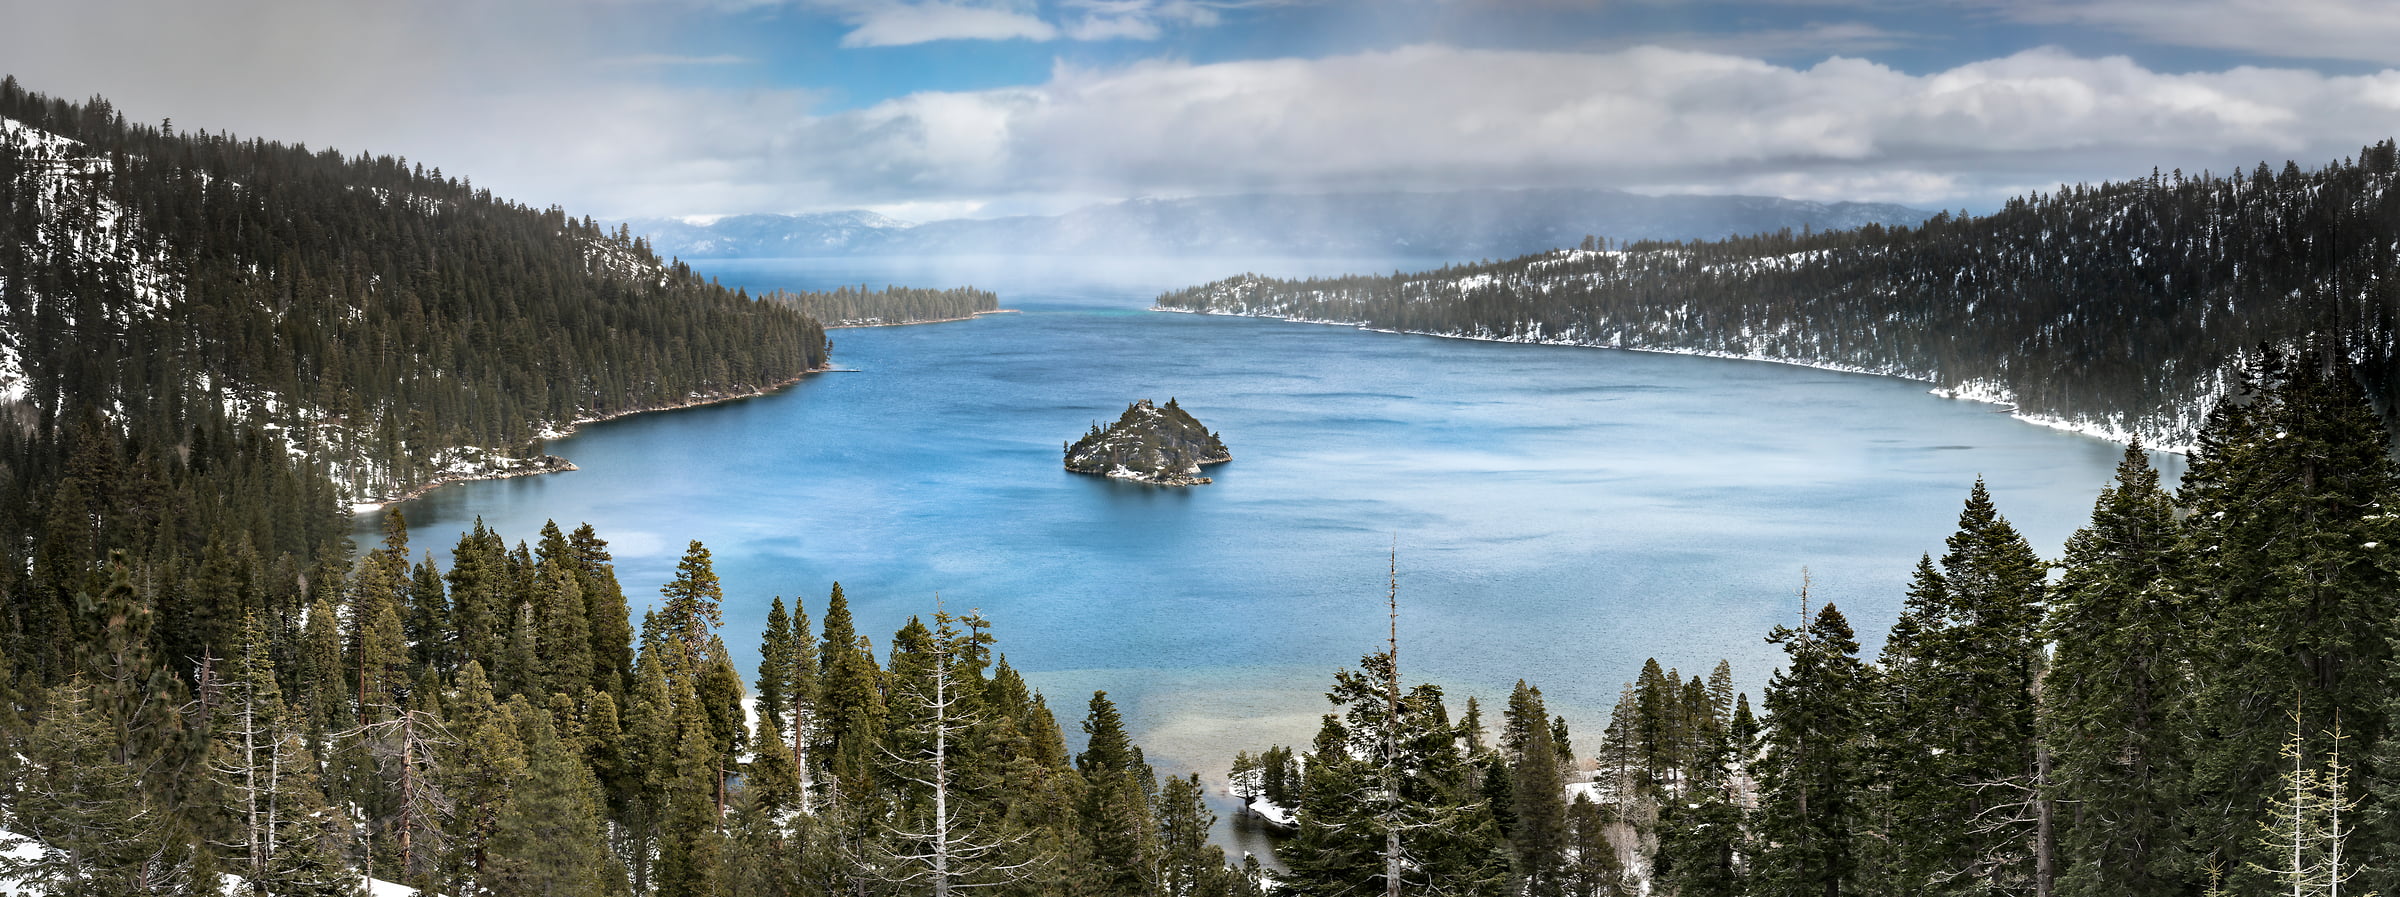 341 megapixels! A very high resolution, large-format VAST photo of Emerald Bay in Lake Tahoe in winter with snow; fine art landscape photograph created by Justin Katz in California.